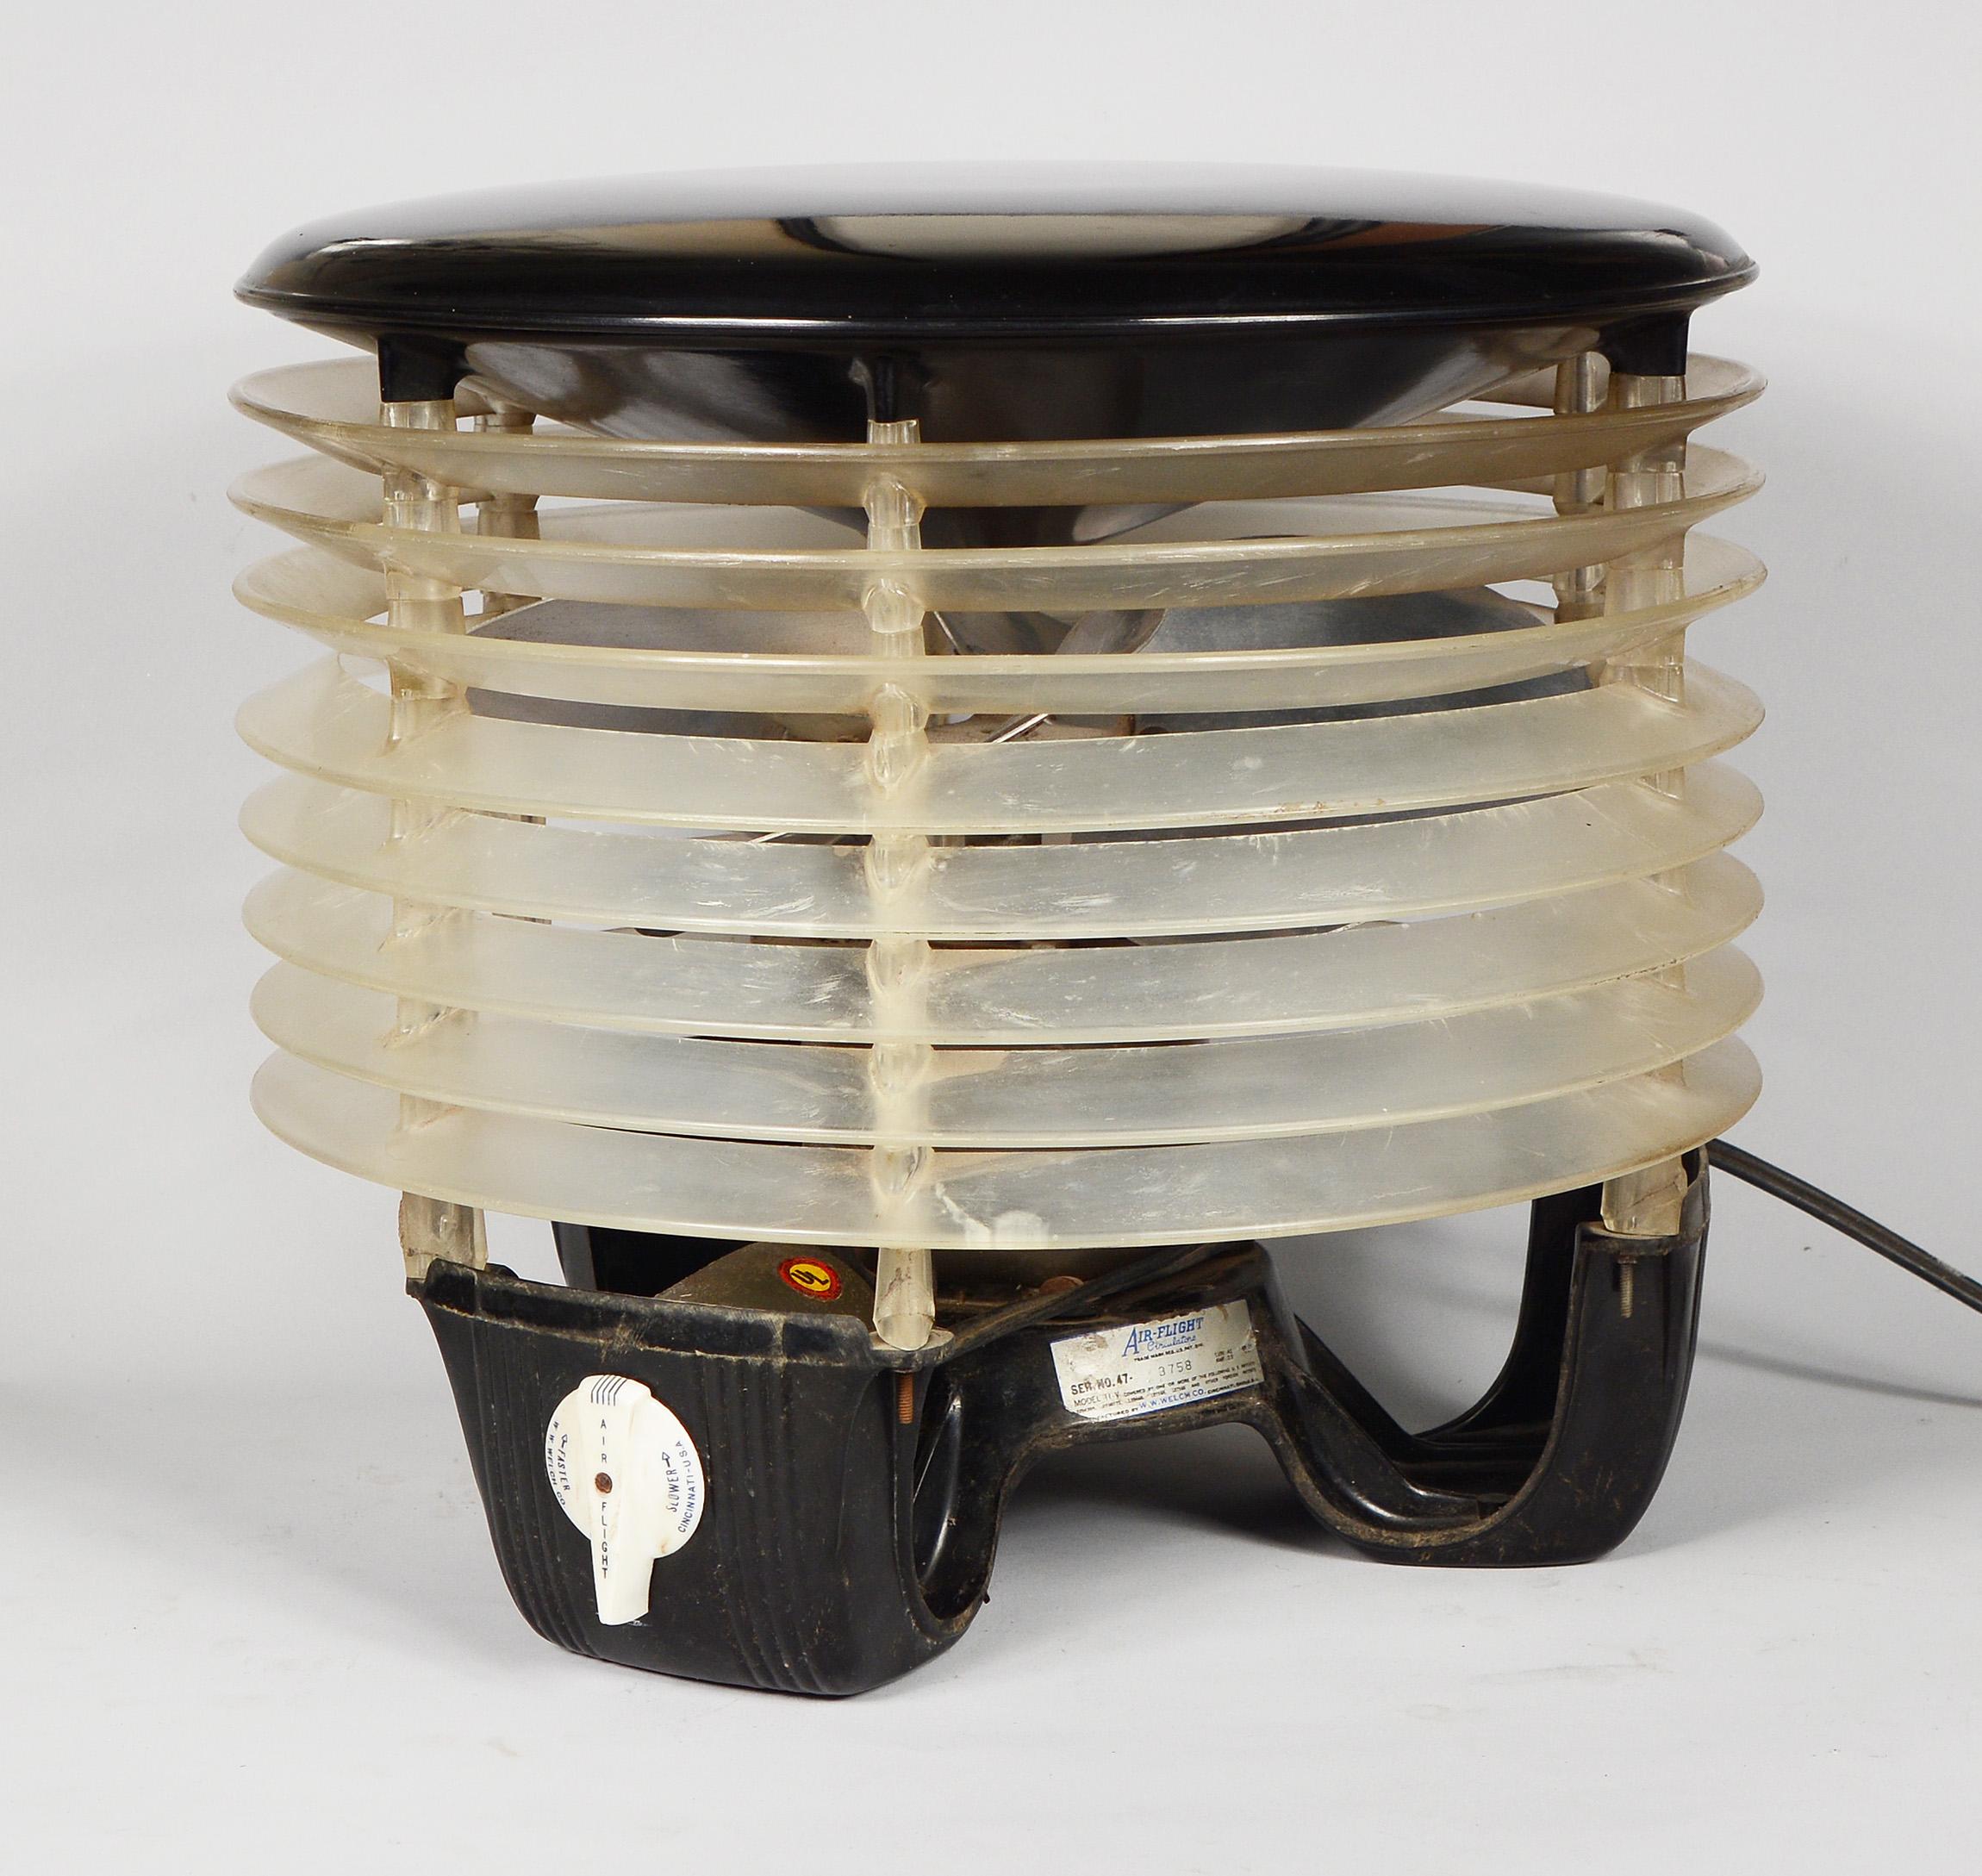 Air Flight machine age hassock fan manufactured by W. W. Welch Company. This fan has a Bakelite top and bottom with clear plastic louvers in between. The fan has two speeds and is in working condition. None of the louvers are broken but some do